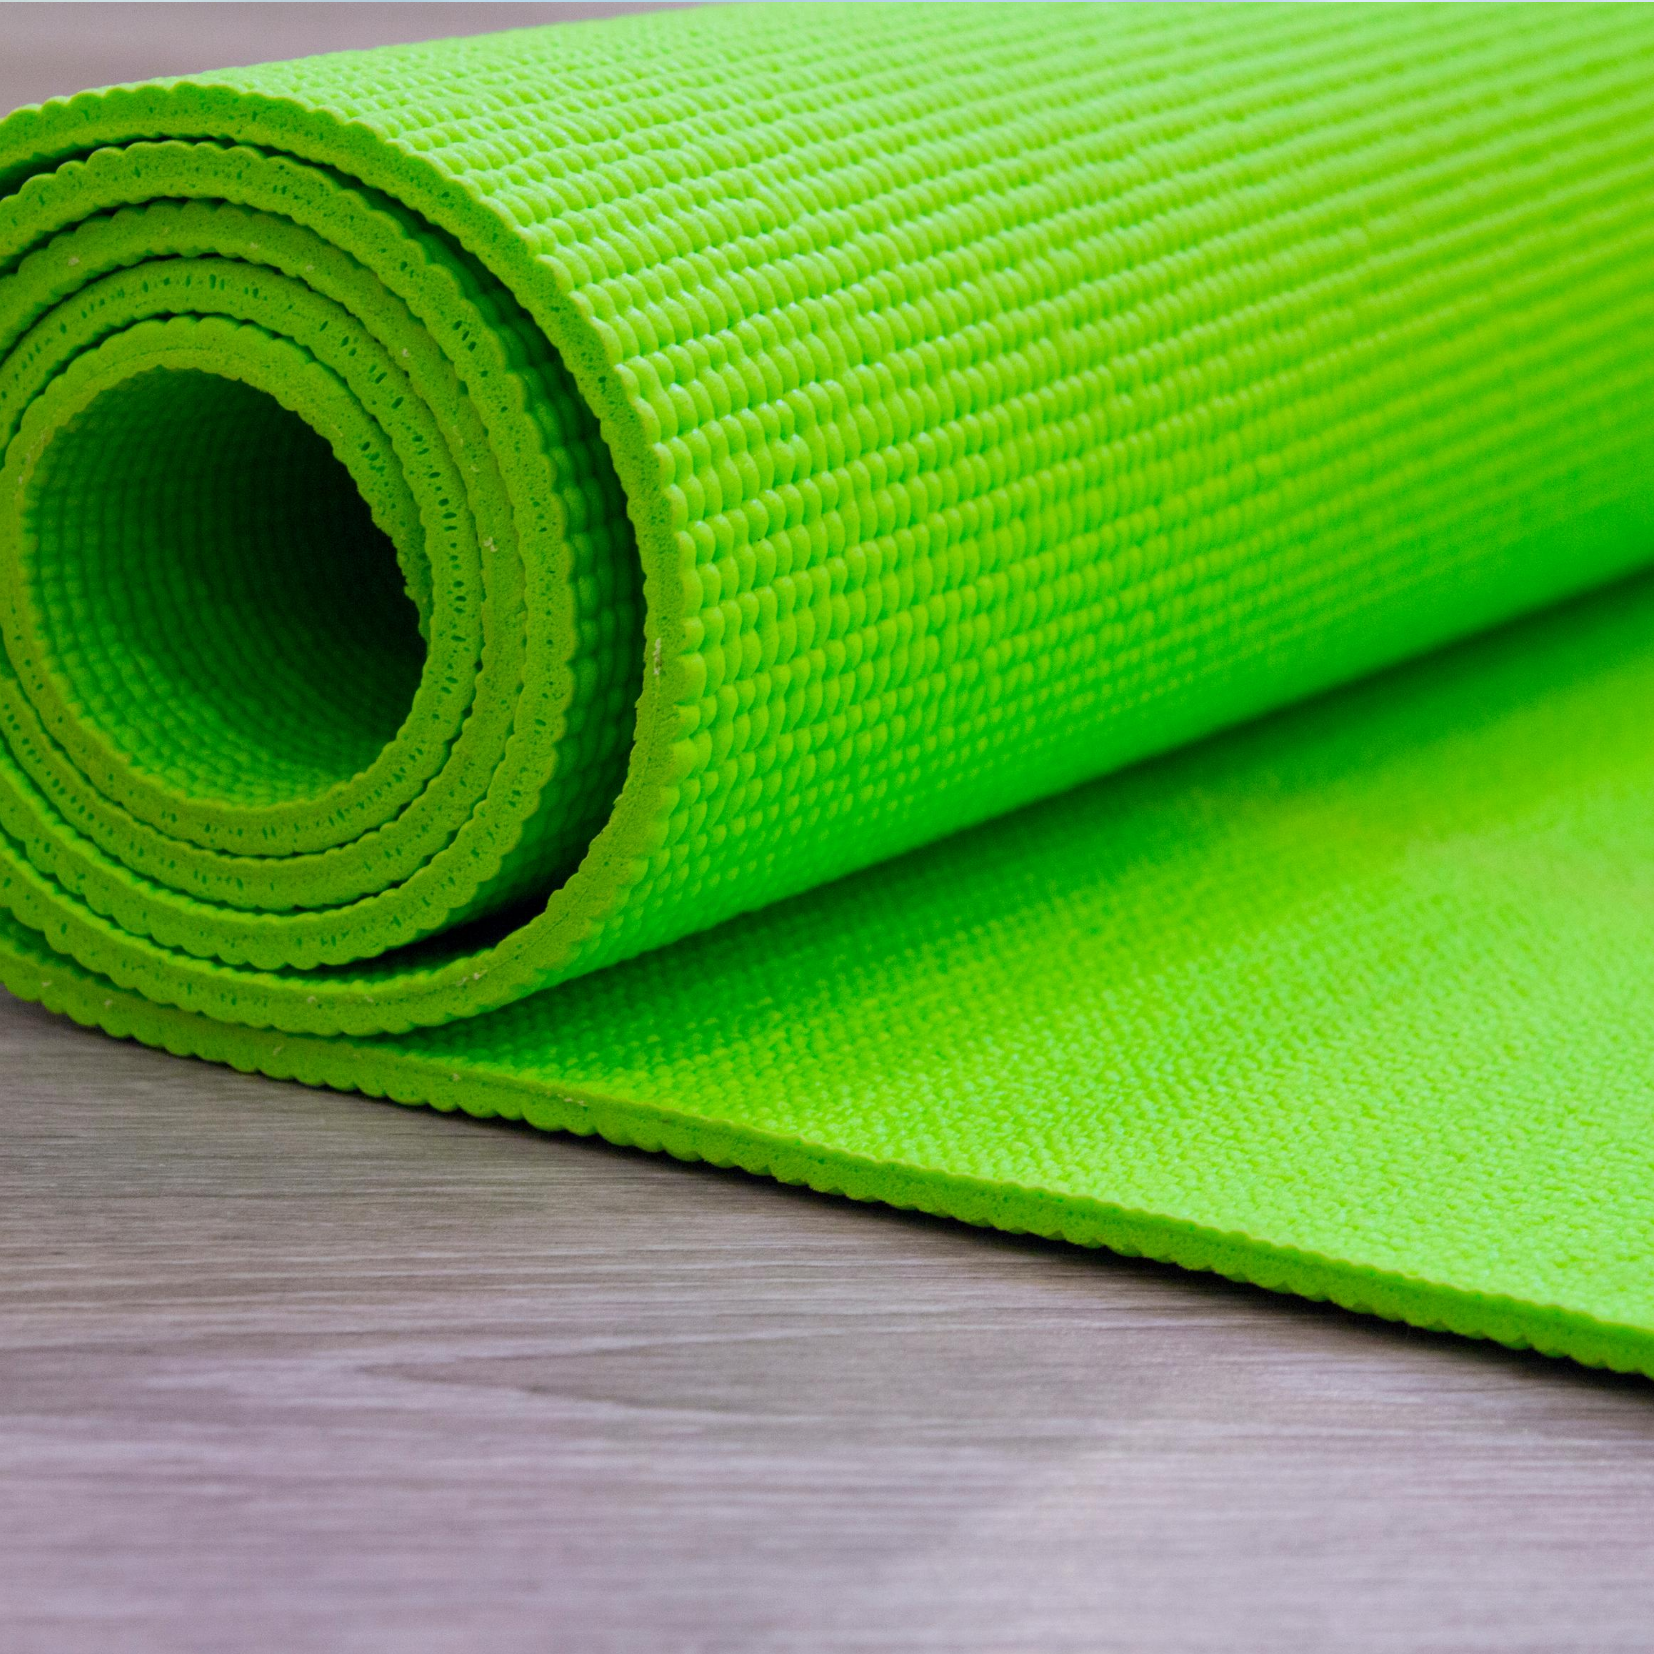 Green Mat depicting Exercise/ Movement Services